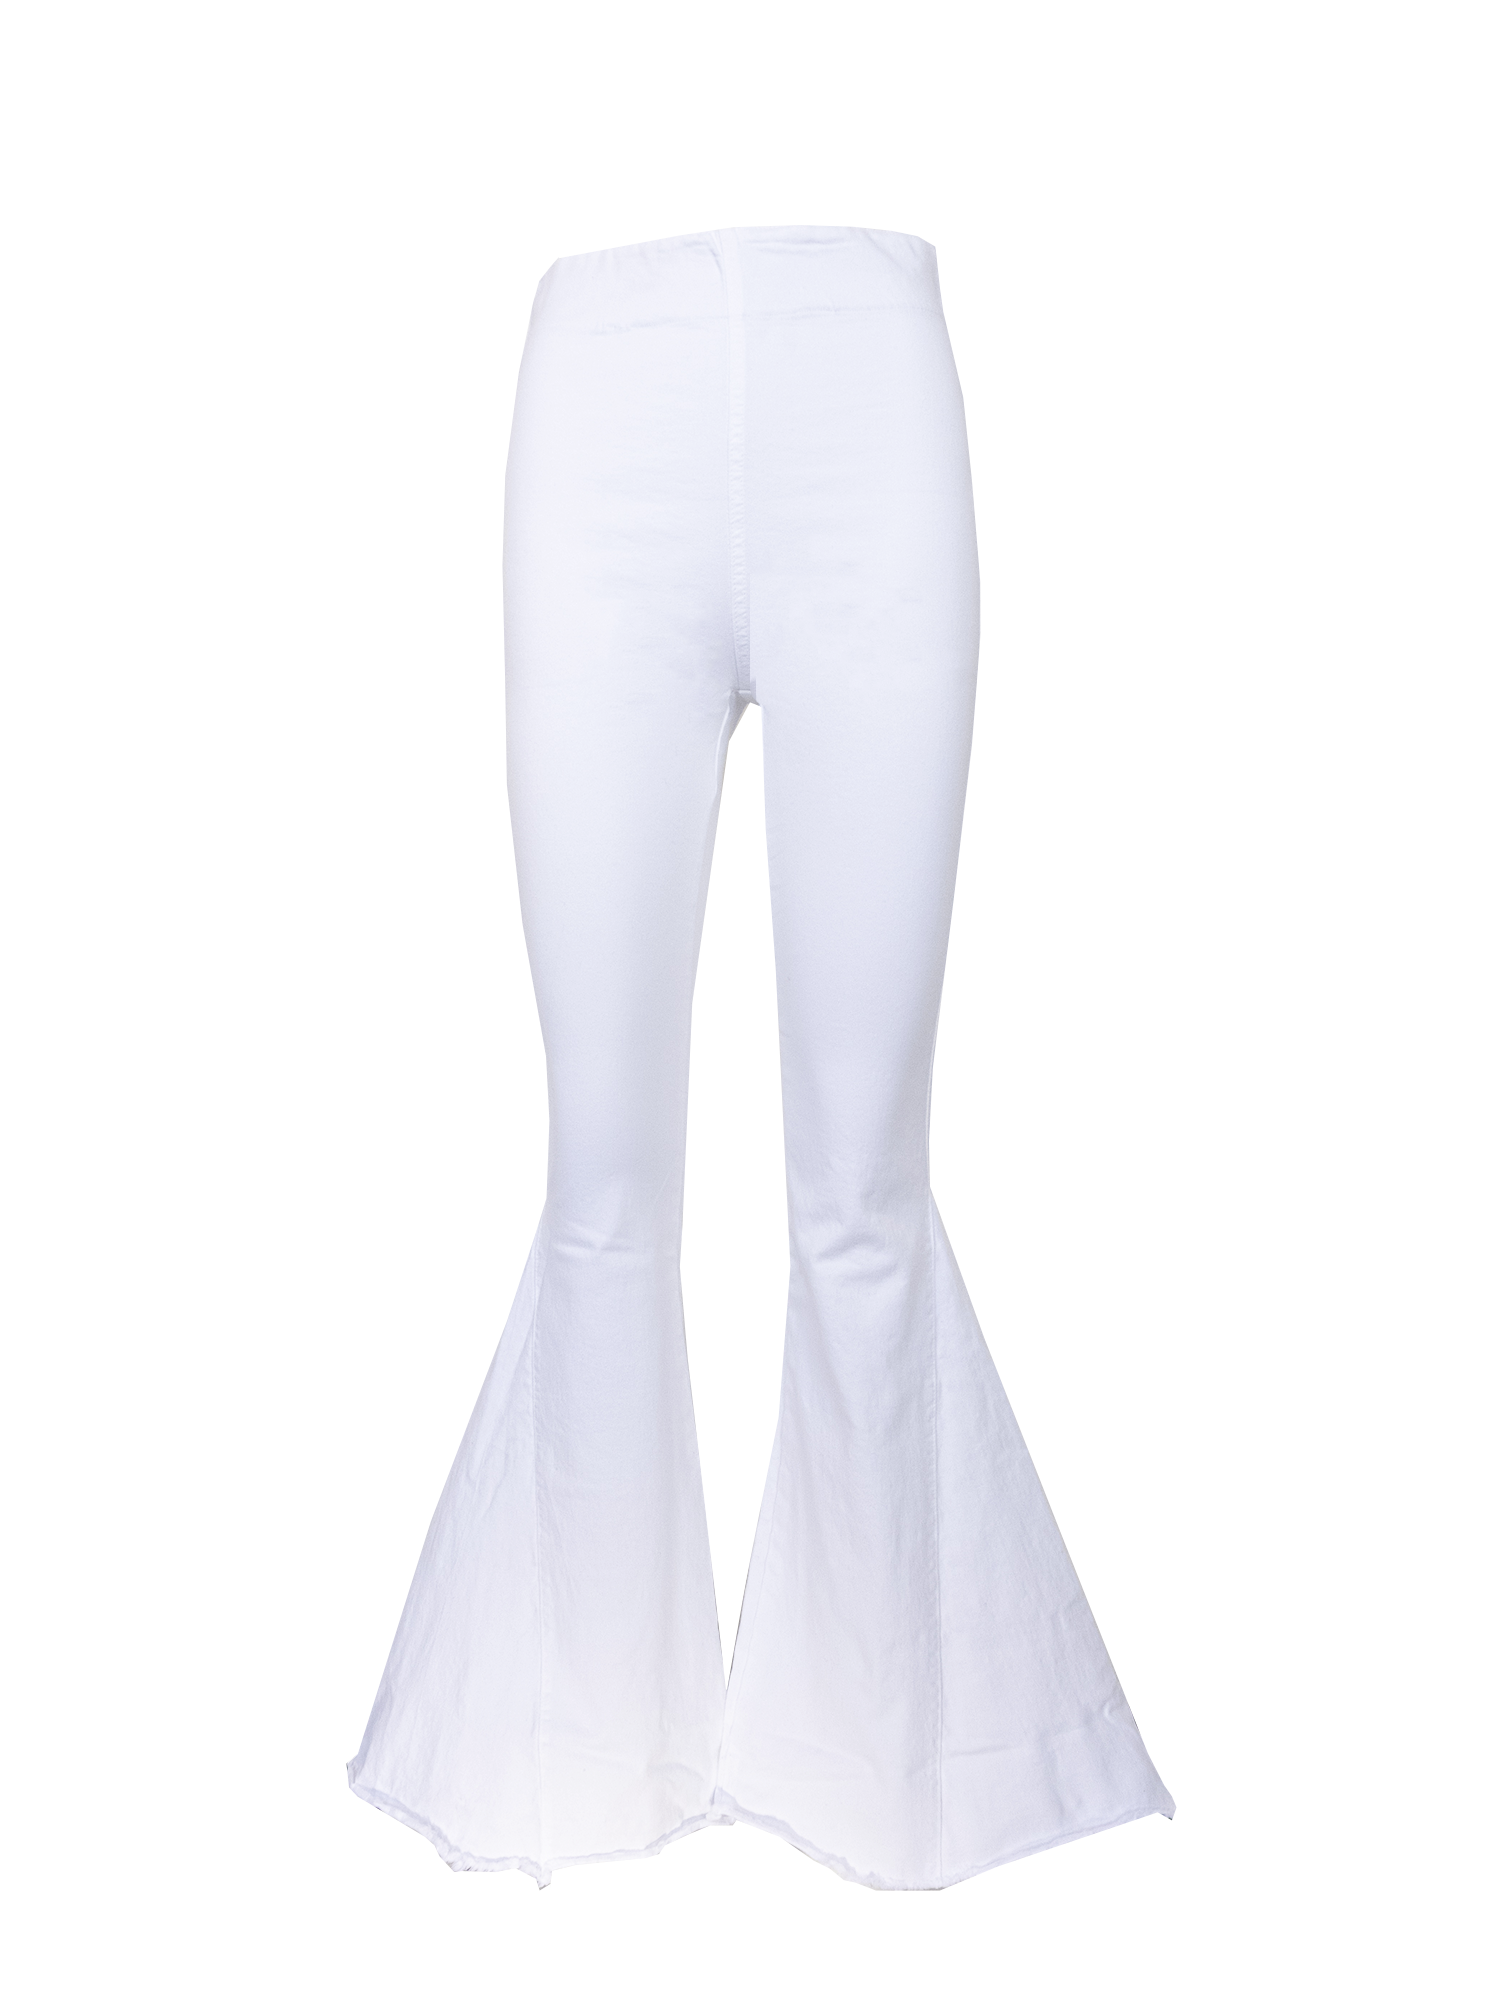 LOLISSIMA - flared trousers in white cotton